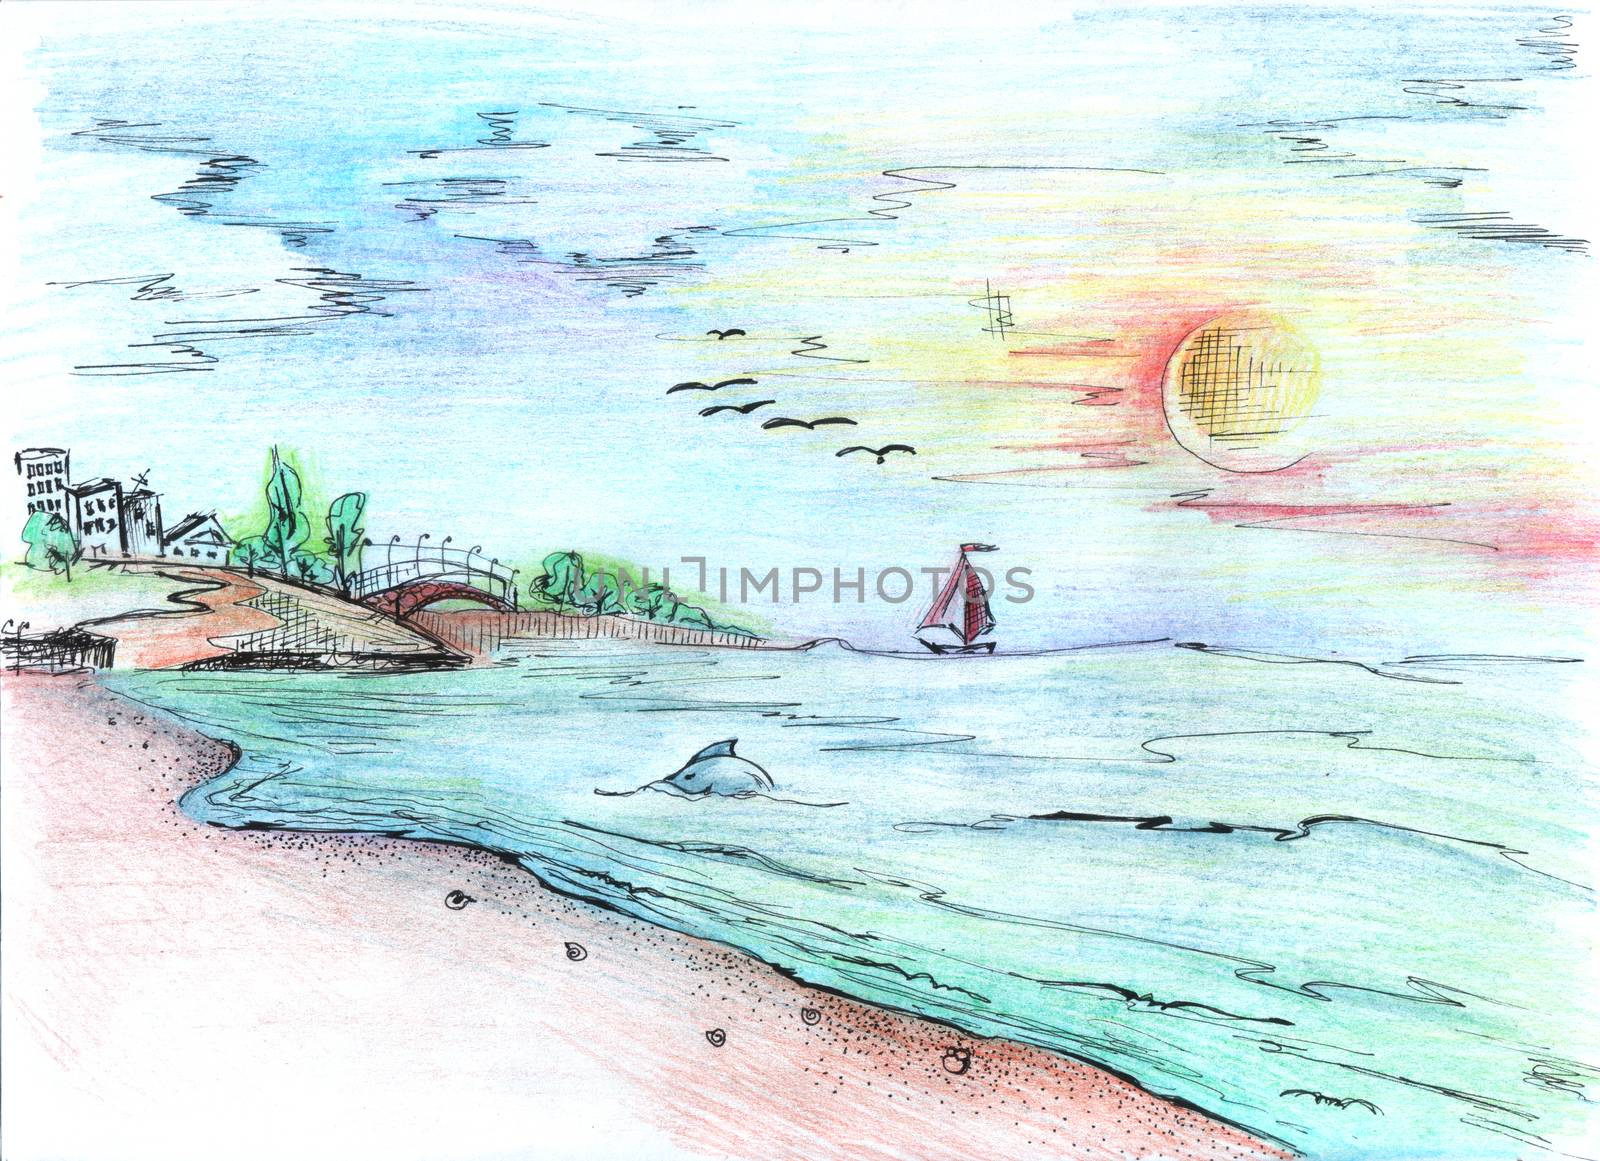 Illustration - pencil drawn seascape at sunset by Madhourse